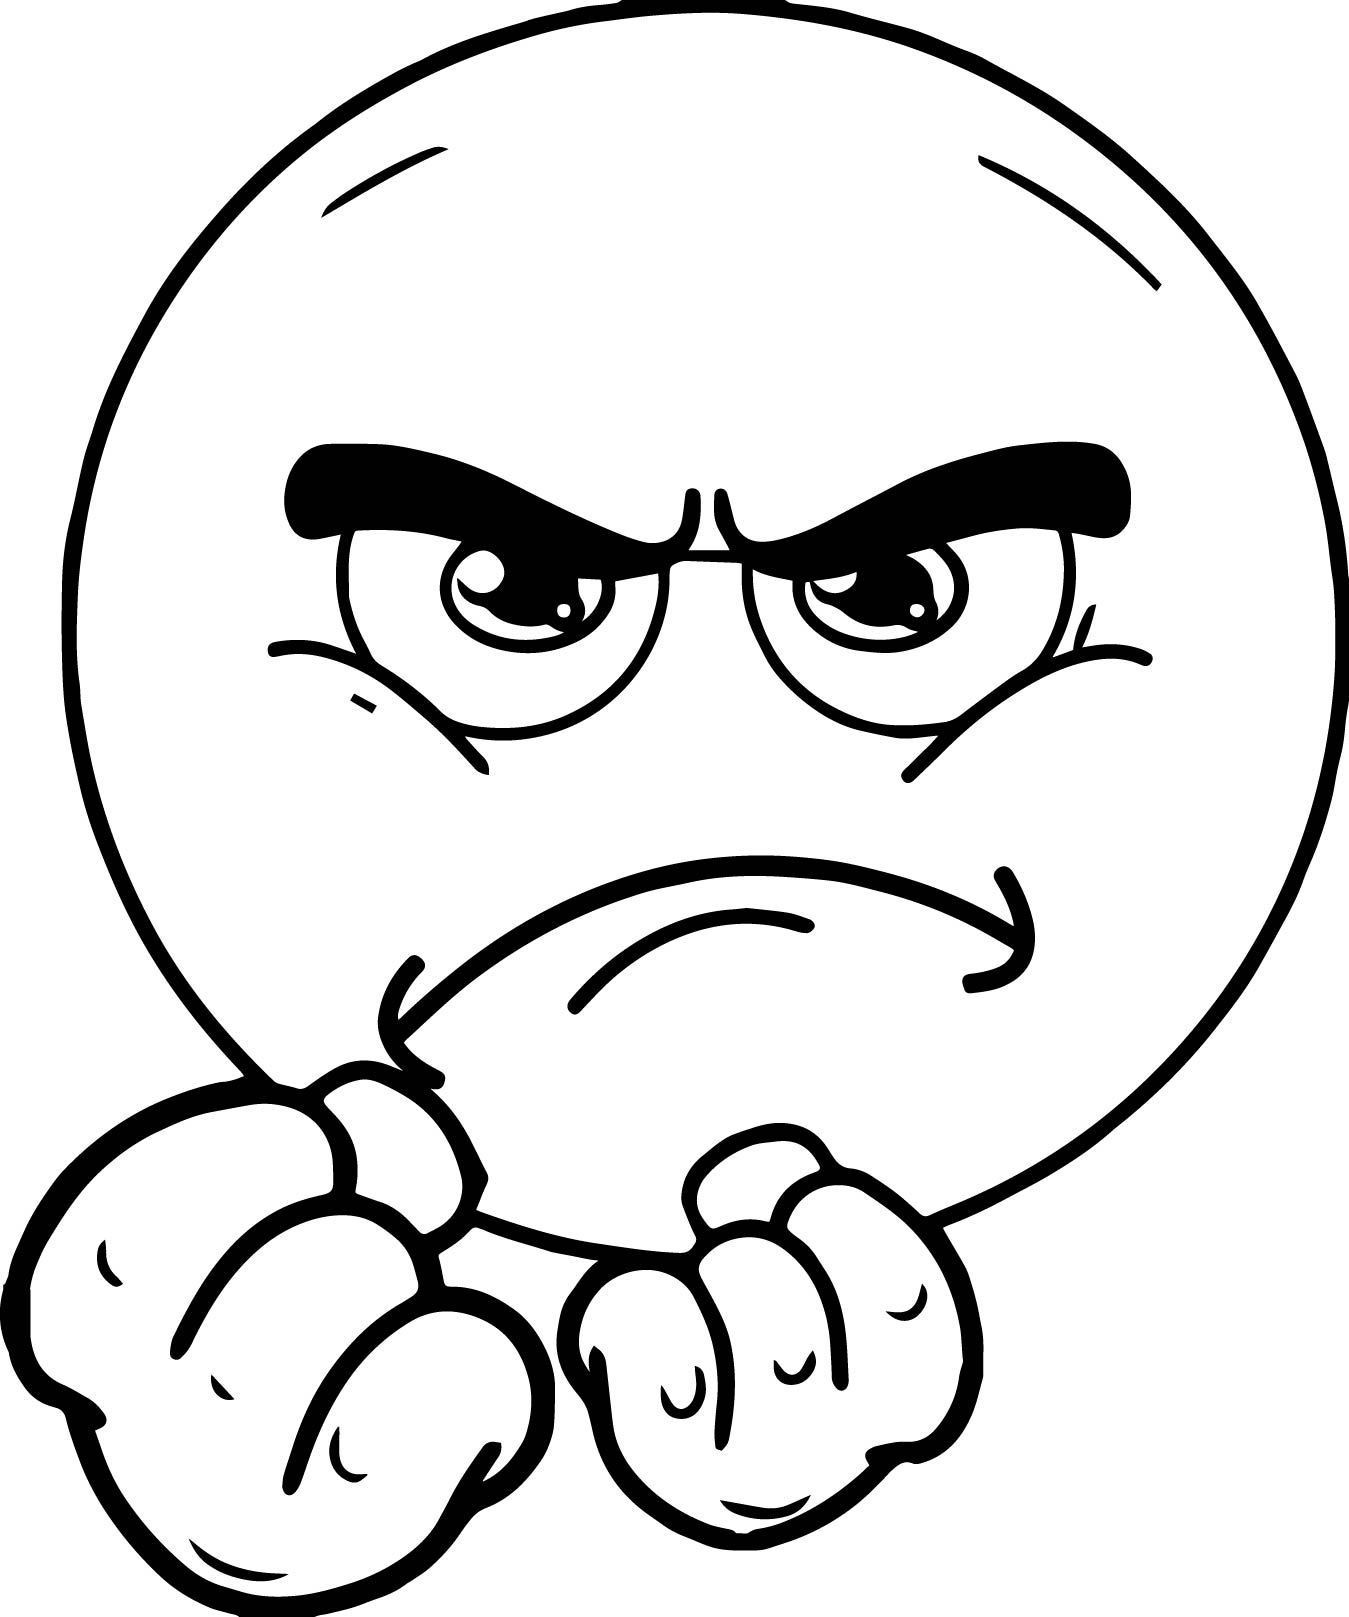 Emoji Angry Coloring Page Sketch Sketch Coloring Page | Angry cartoon,  Cartoon faces, Angry cartoon face